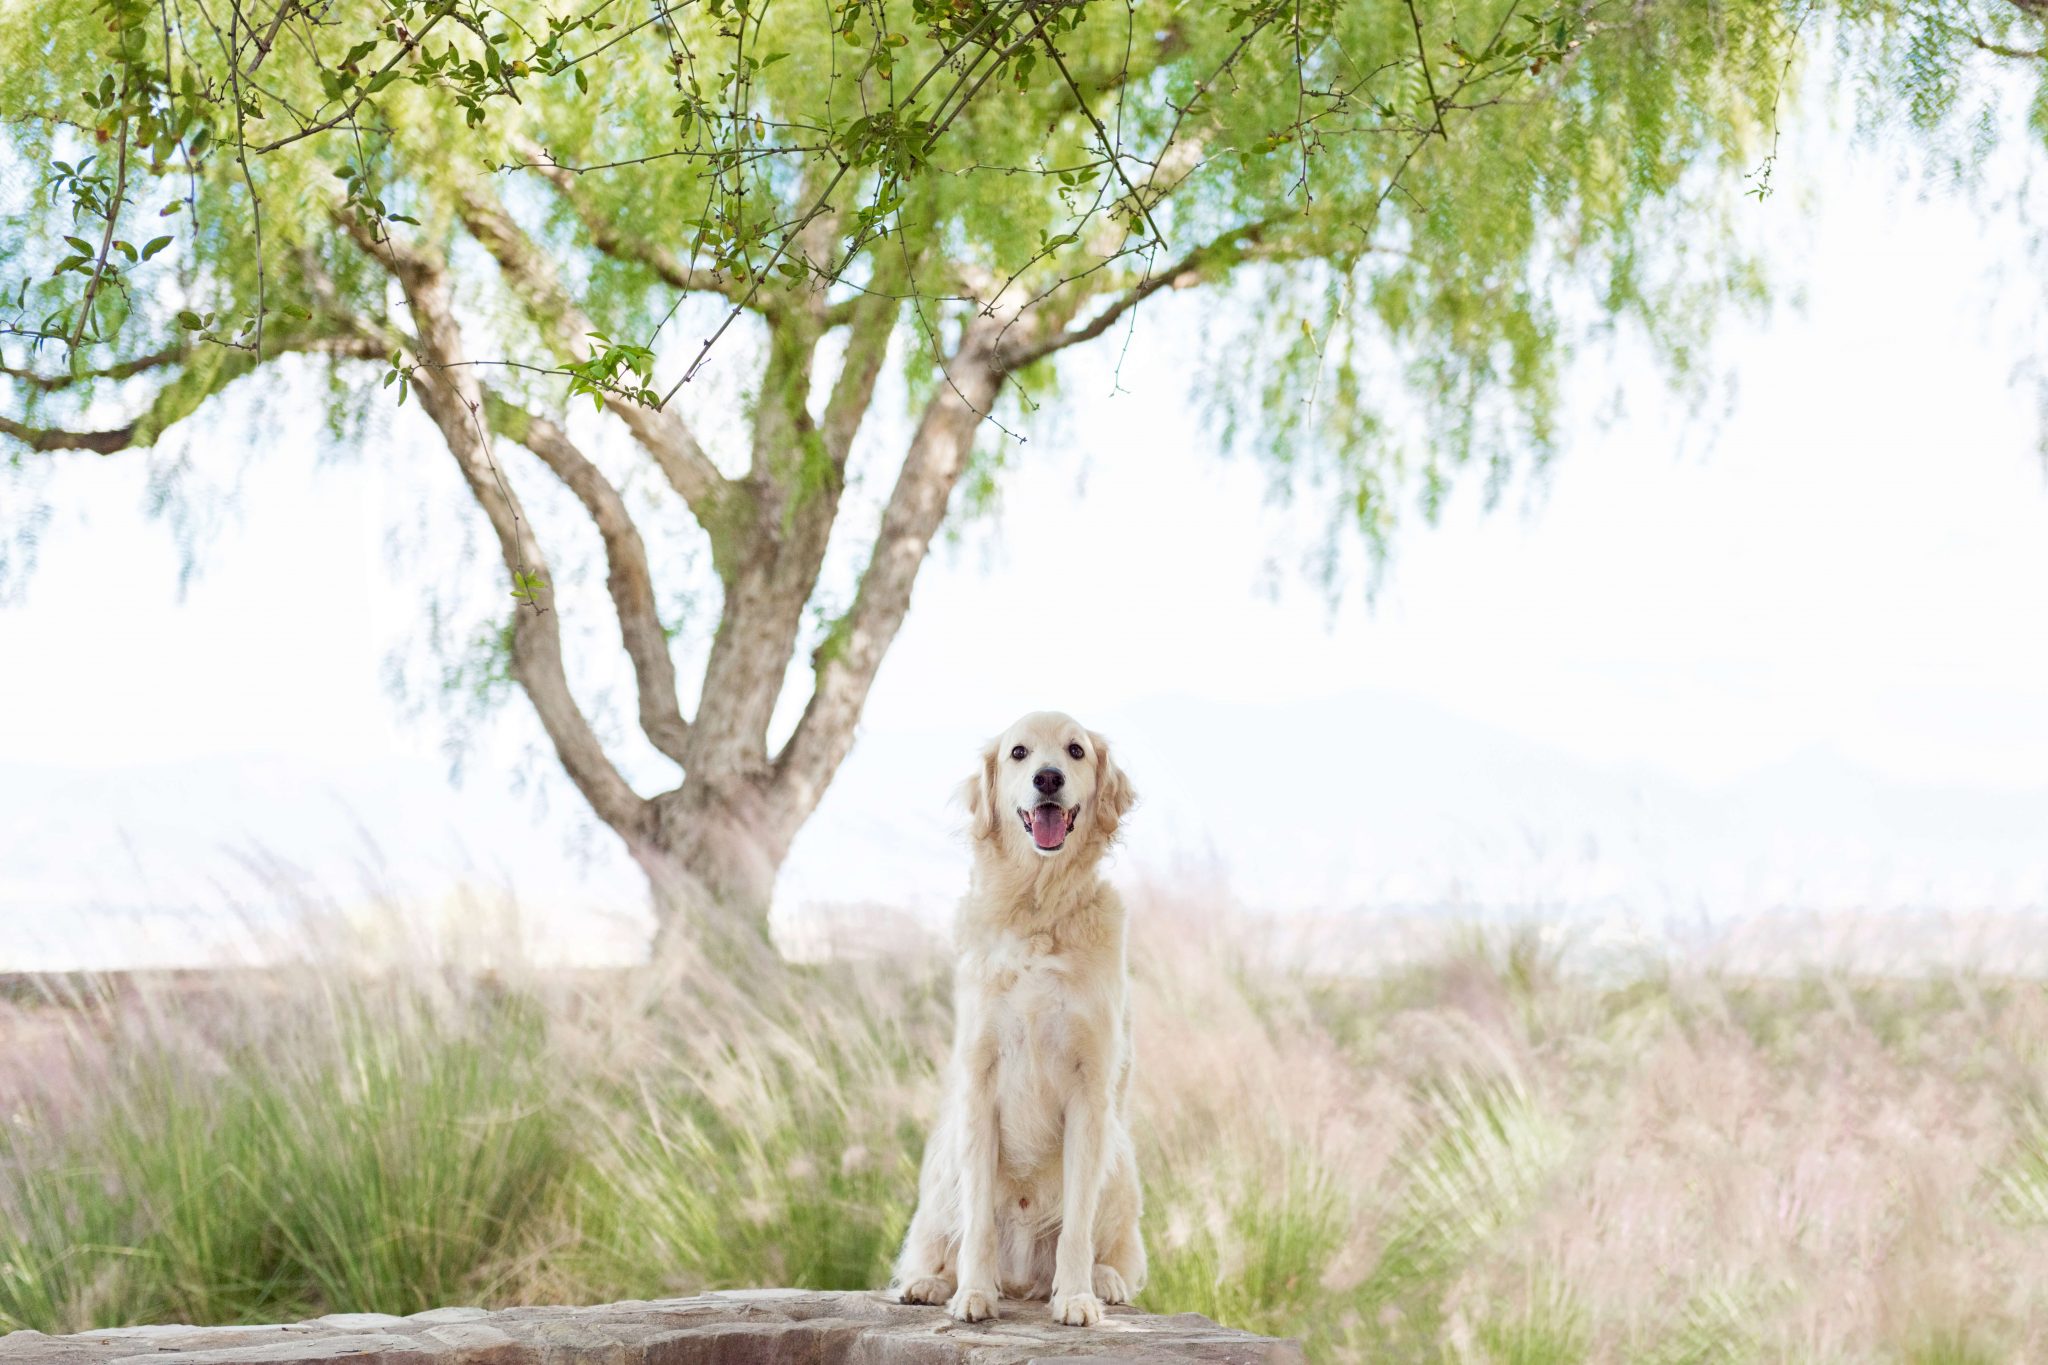 Dog Portraits using a photography concept using Rule of thirds